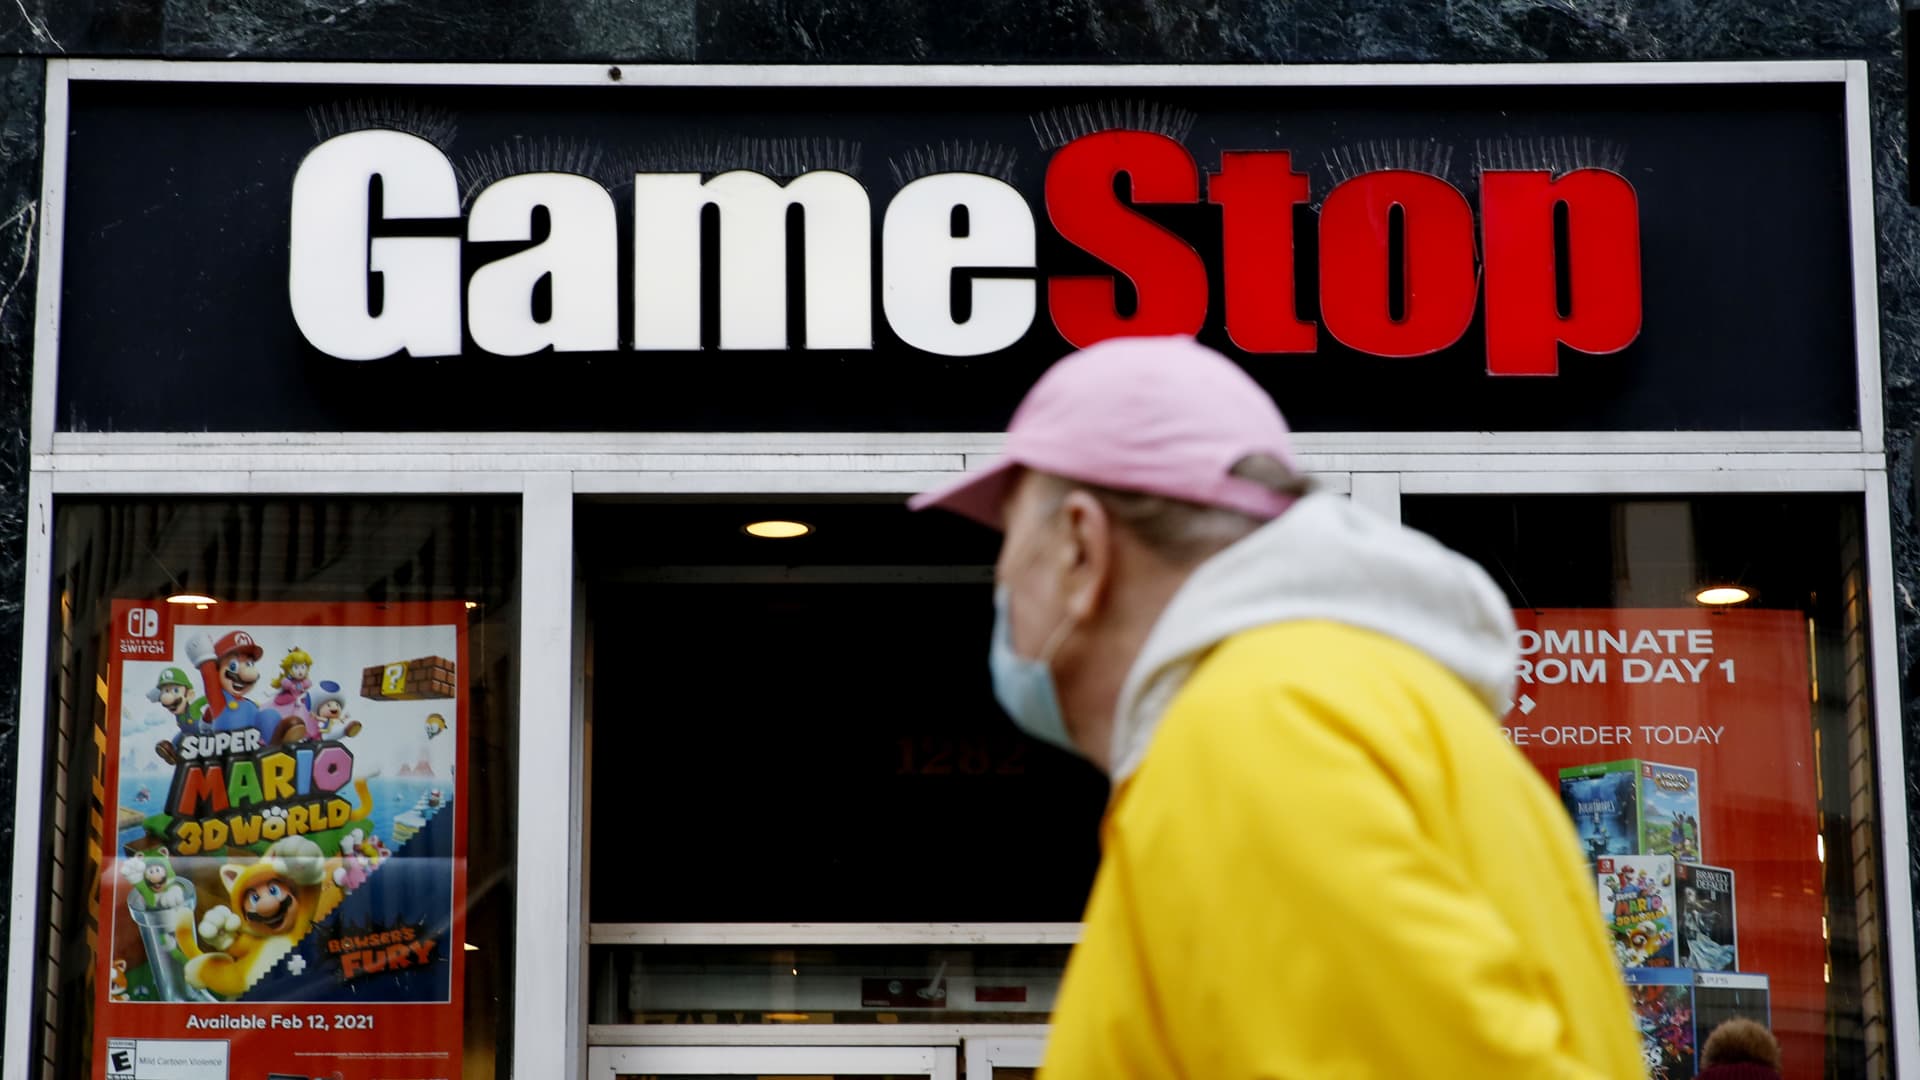 A man looks at GameStop at 6th Avenue on February 25, 2021 in New York.